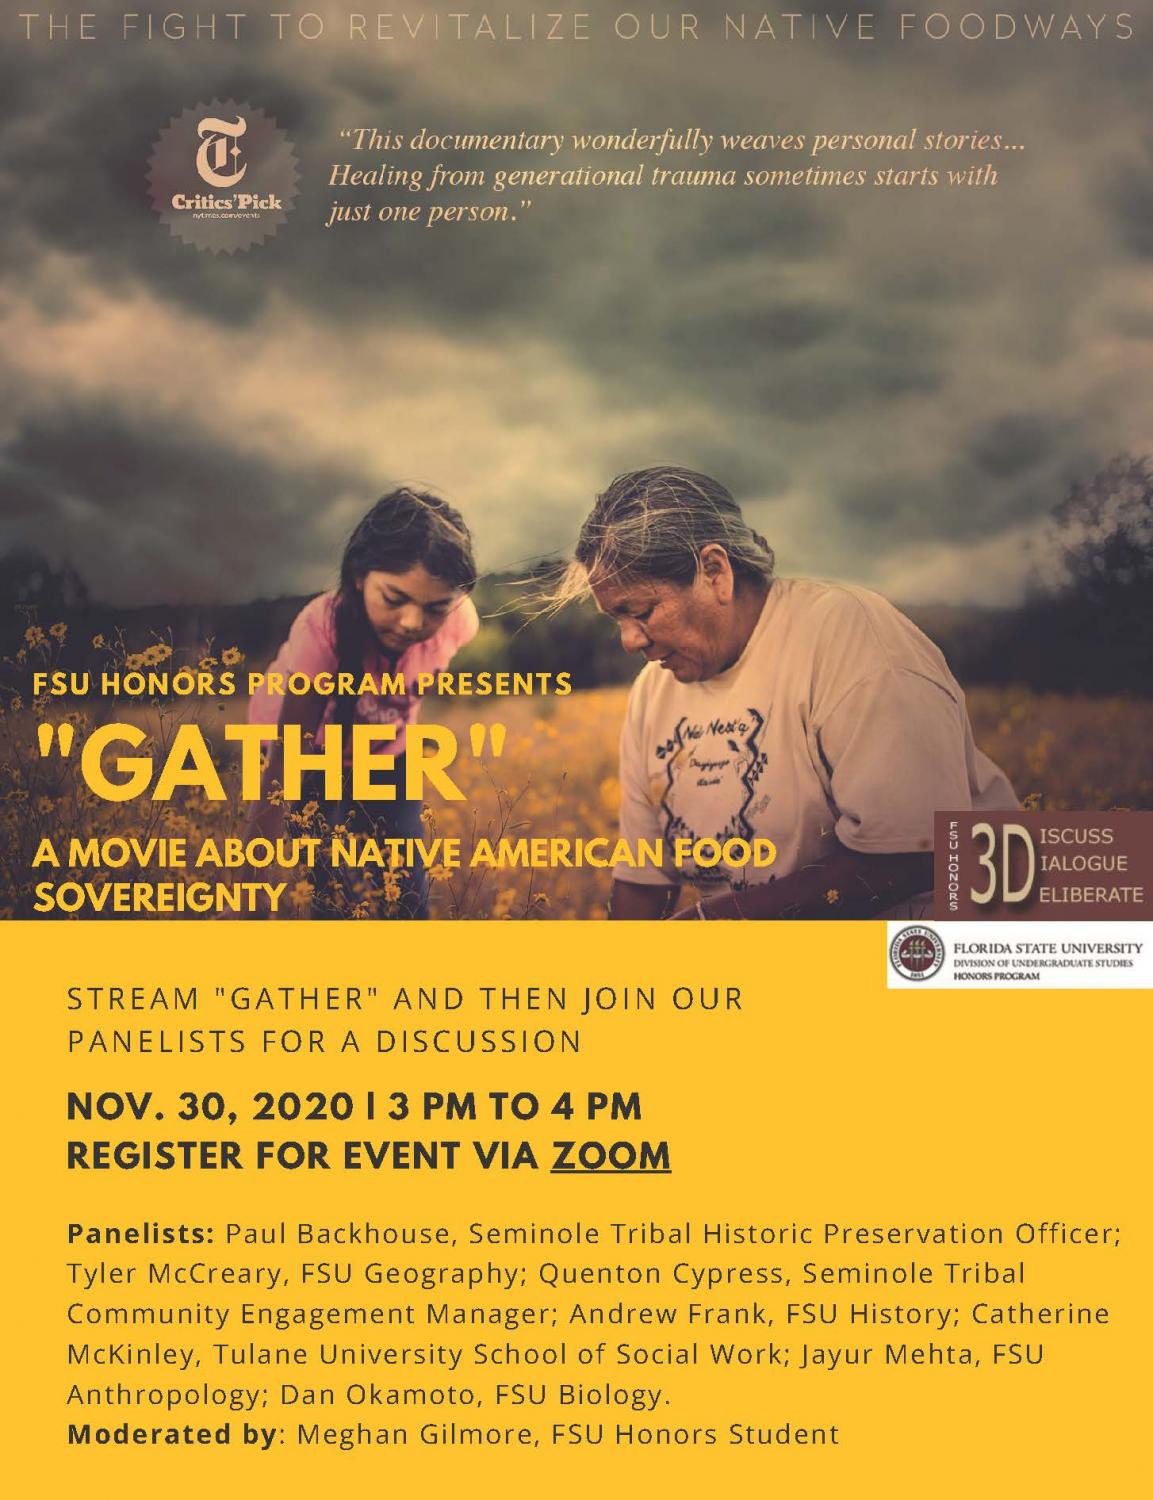 Flyer for Film "Gather" for Panel Discussion held on November 30, 2020